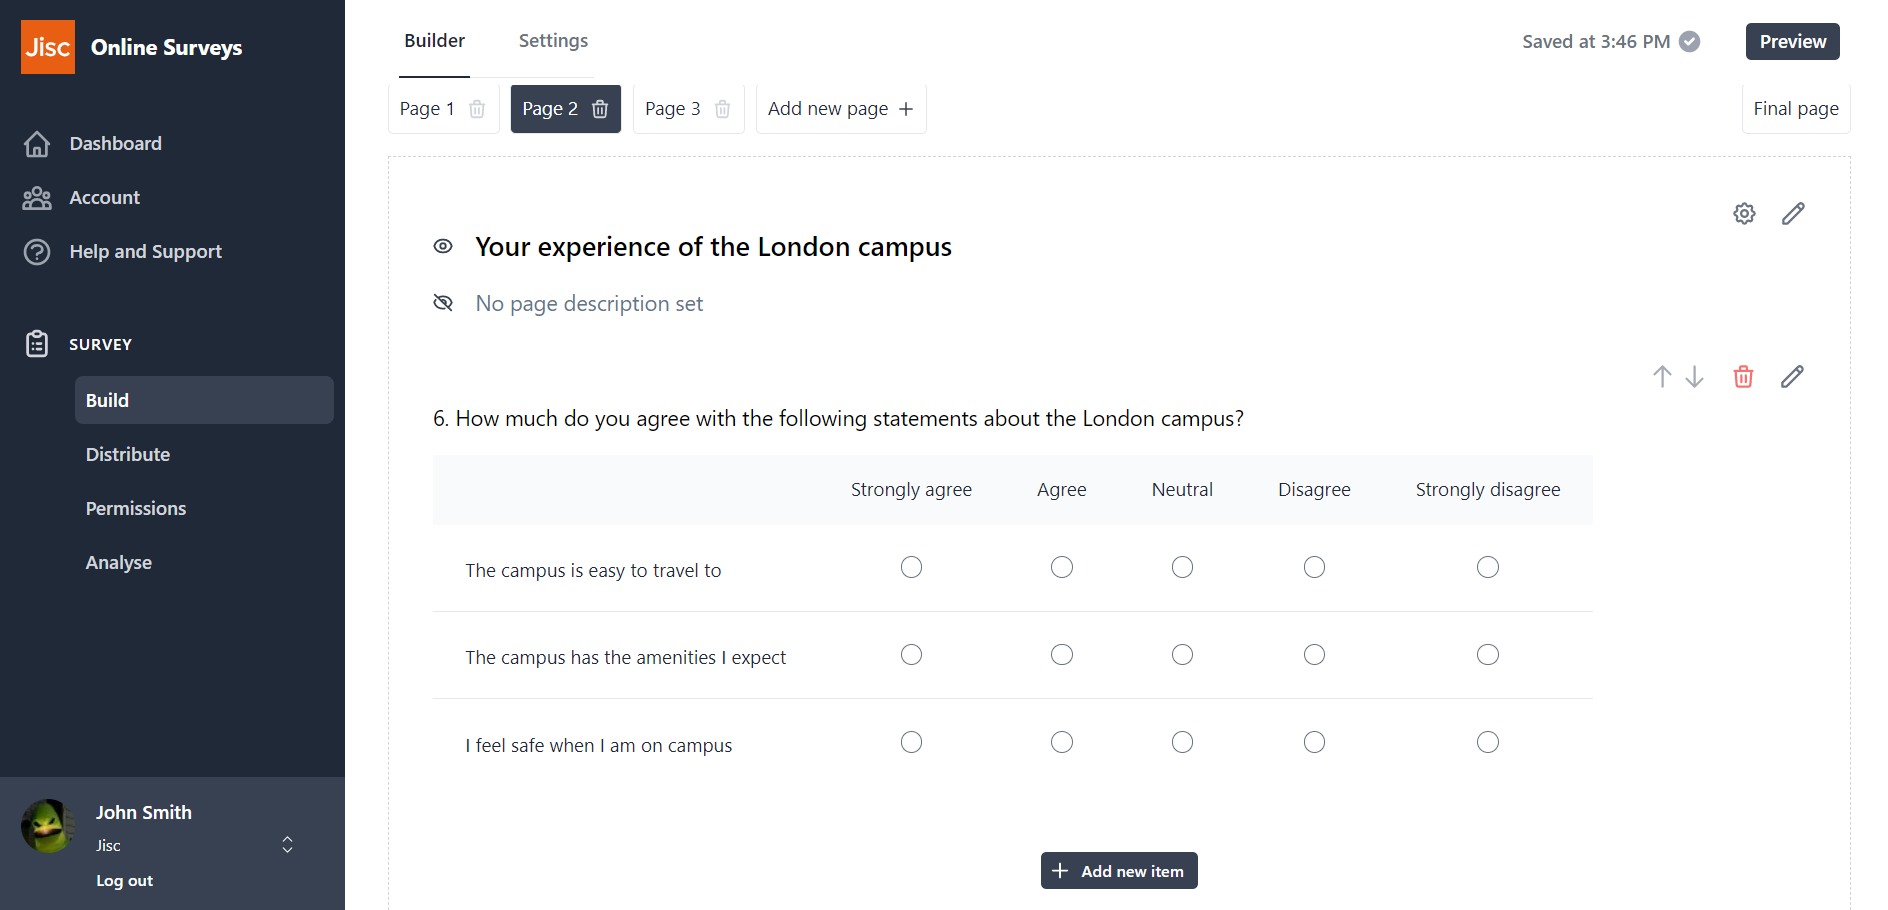 An example of a survey page that would only be relevant to some respondents.